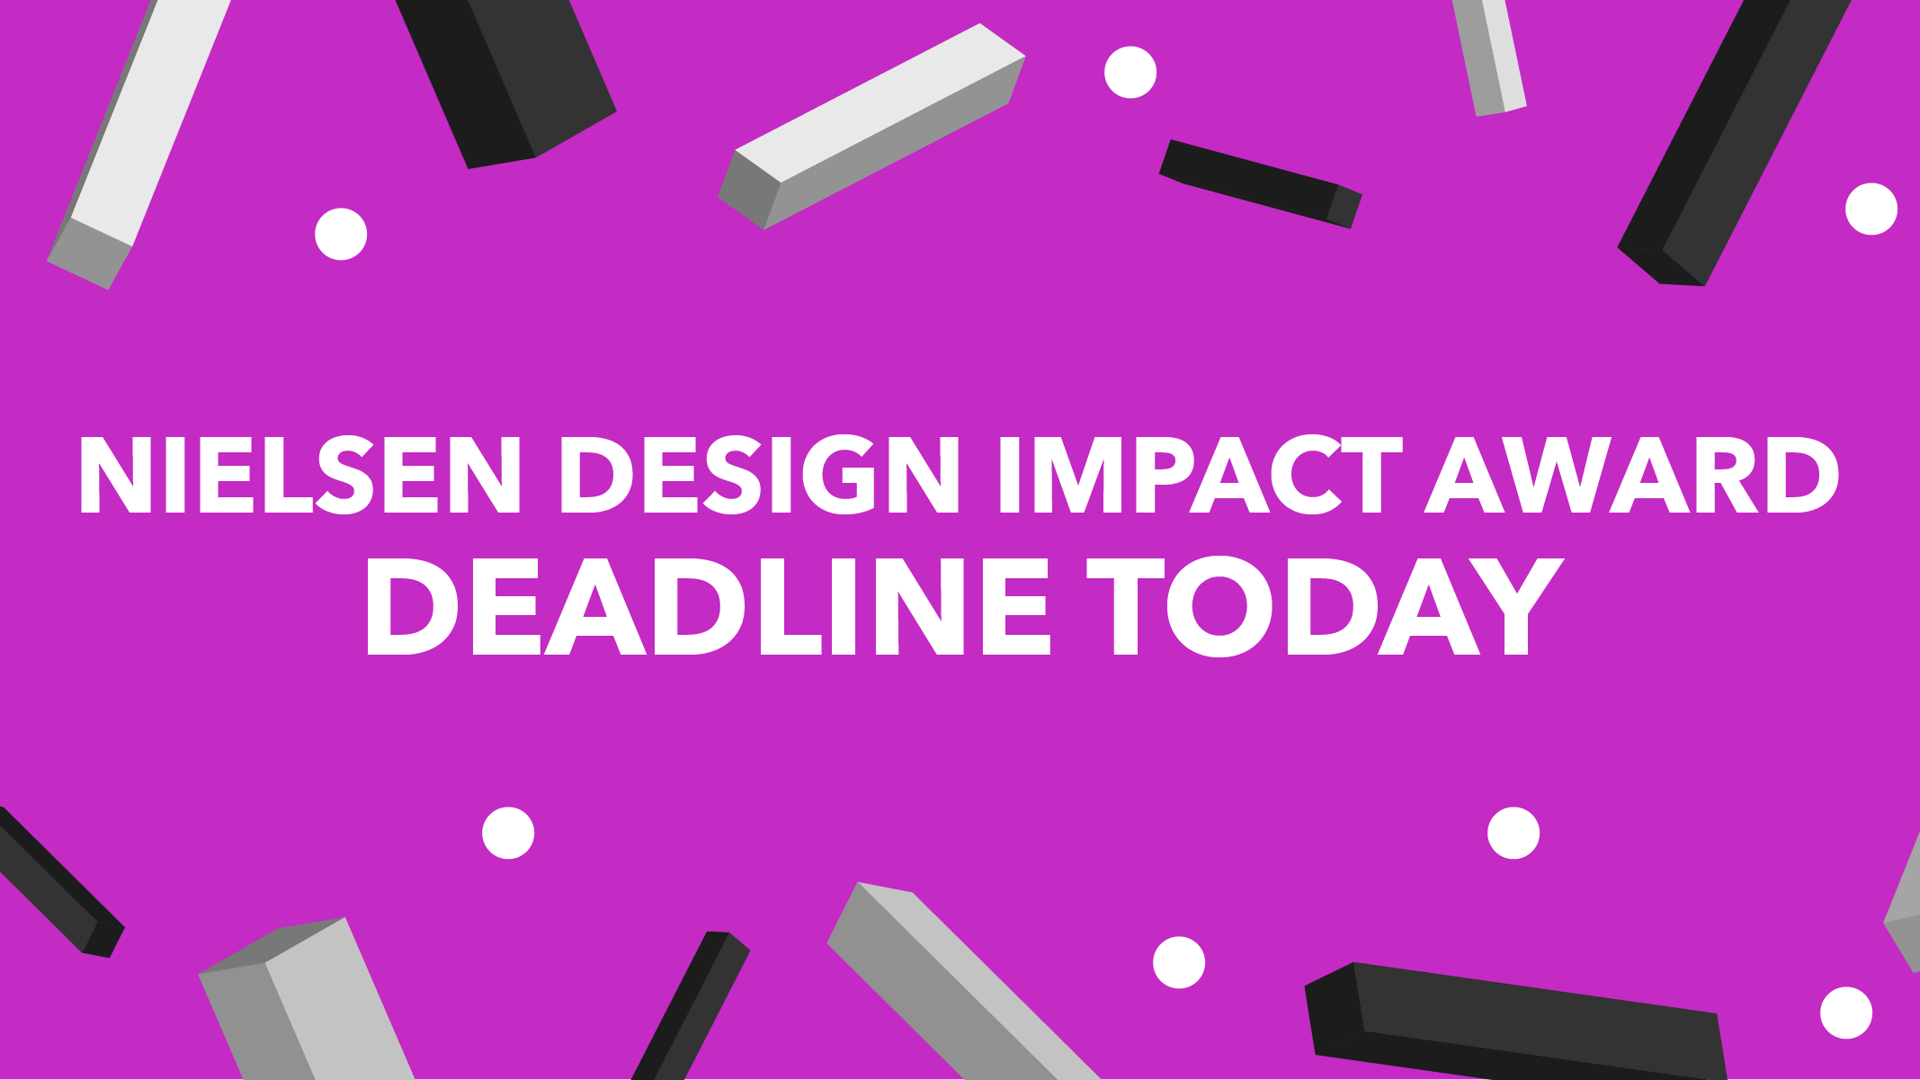 Featured image for Have an Impactful Design? The Nielsen Design Impact Award Deadline is TODAY